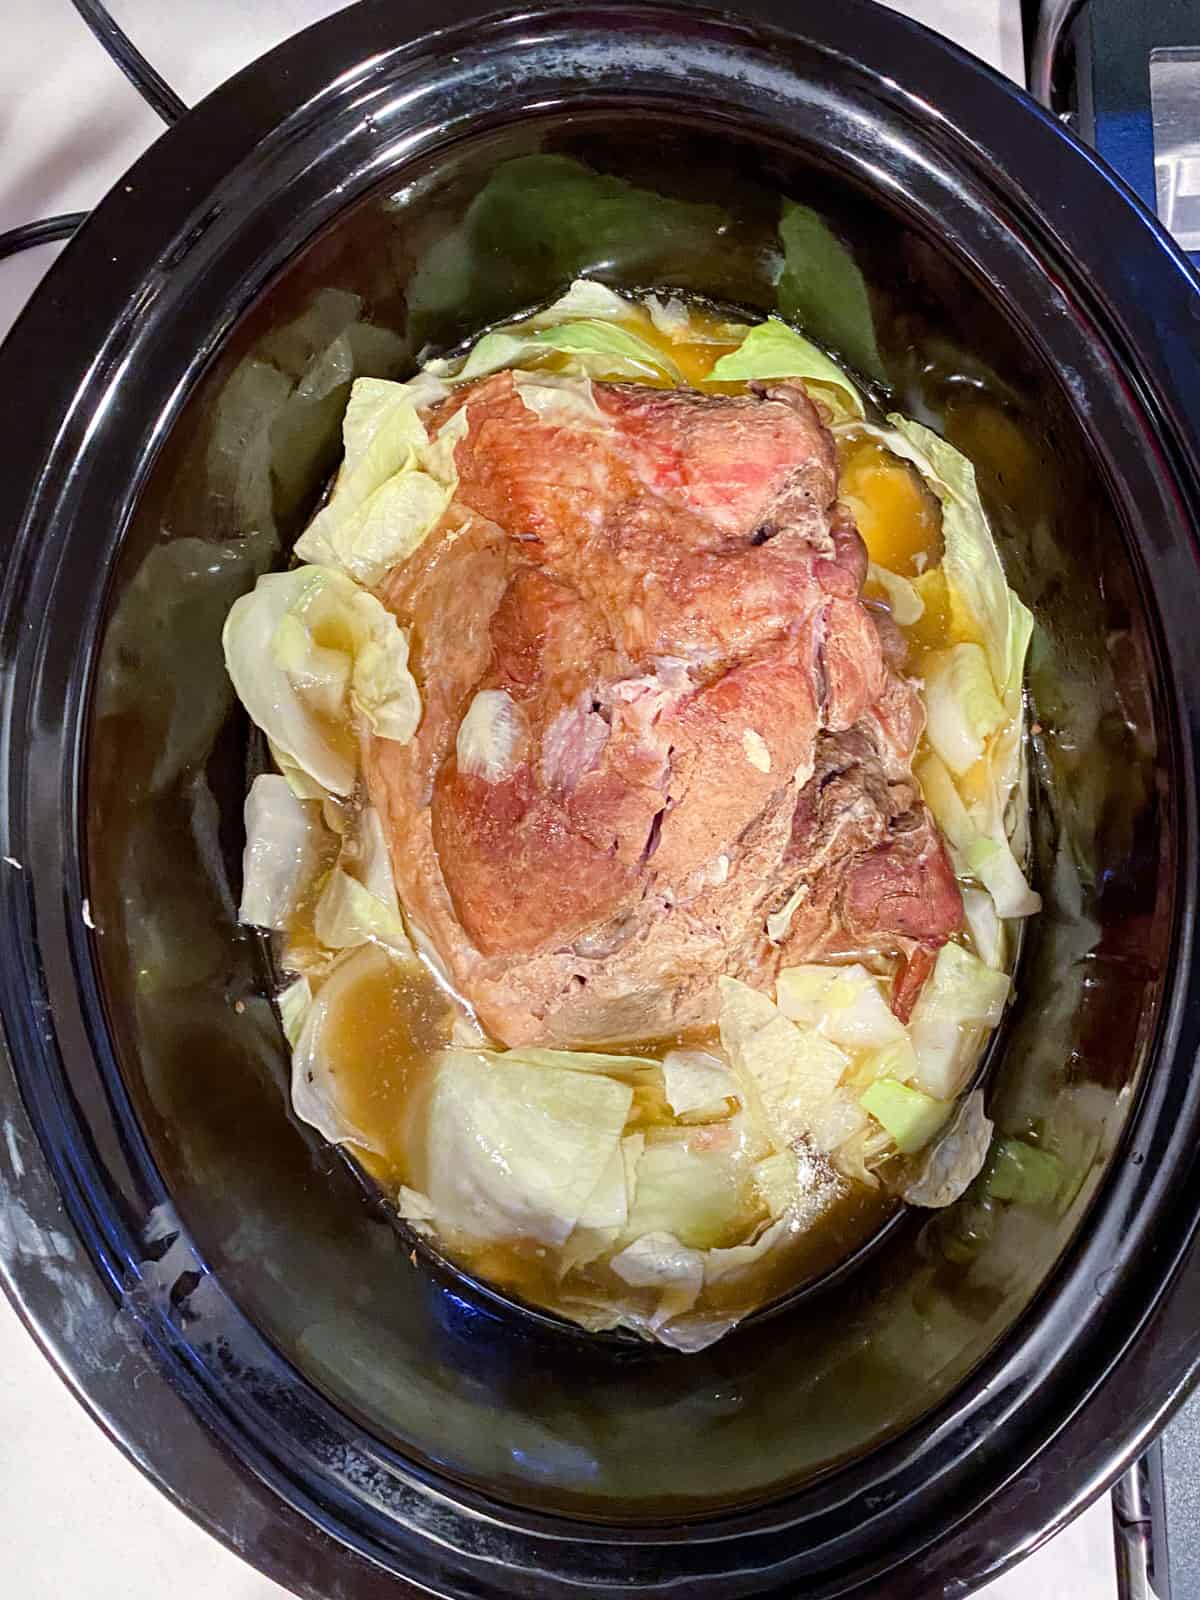 Cooked kalua pork with cabbage in the slow cooker.